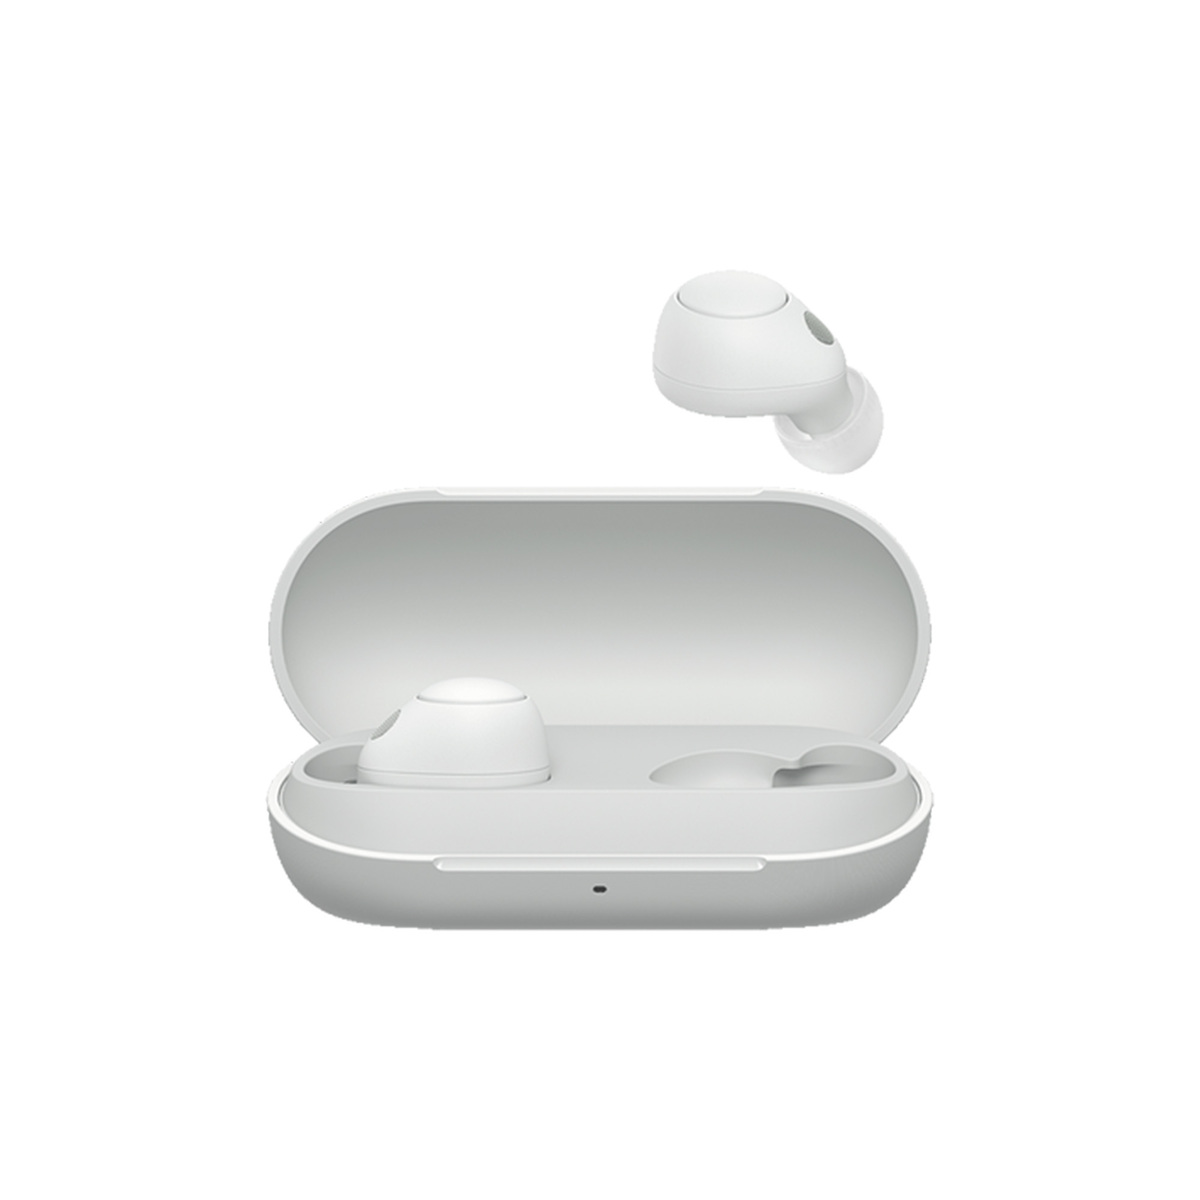 Sony True Wireless Earbuds With Noise Cancellation, White, WFC700